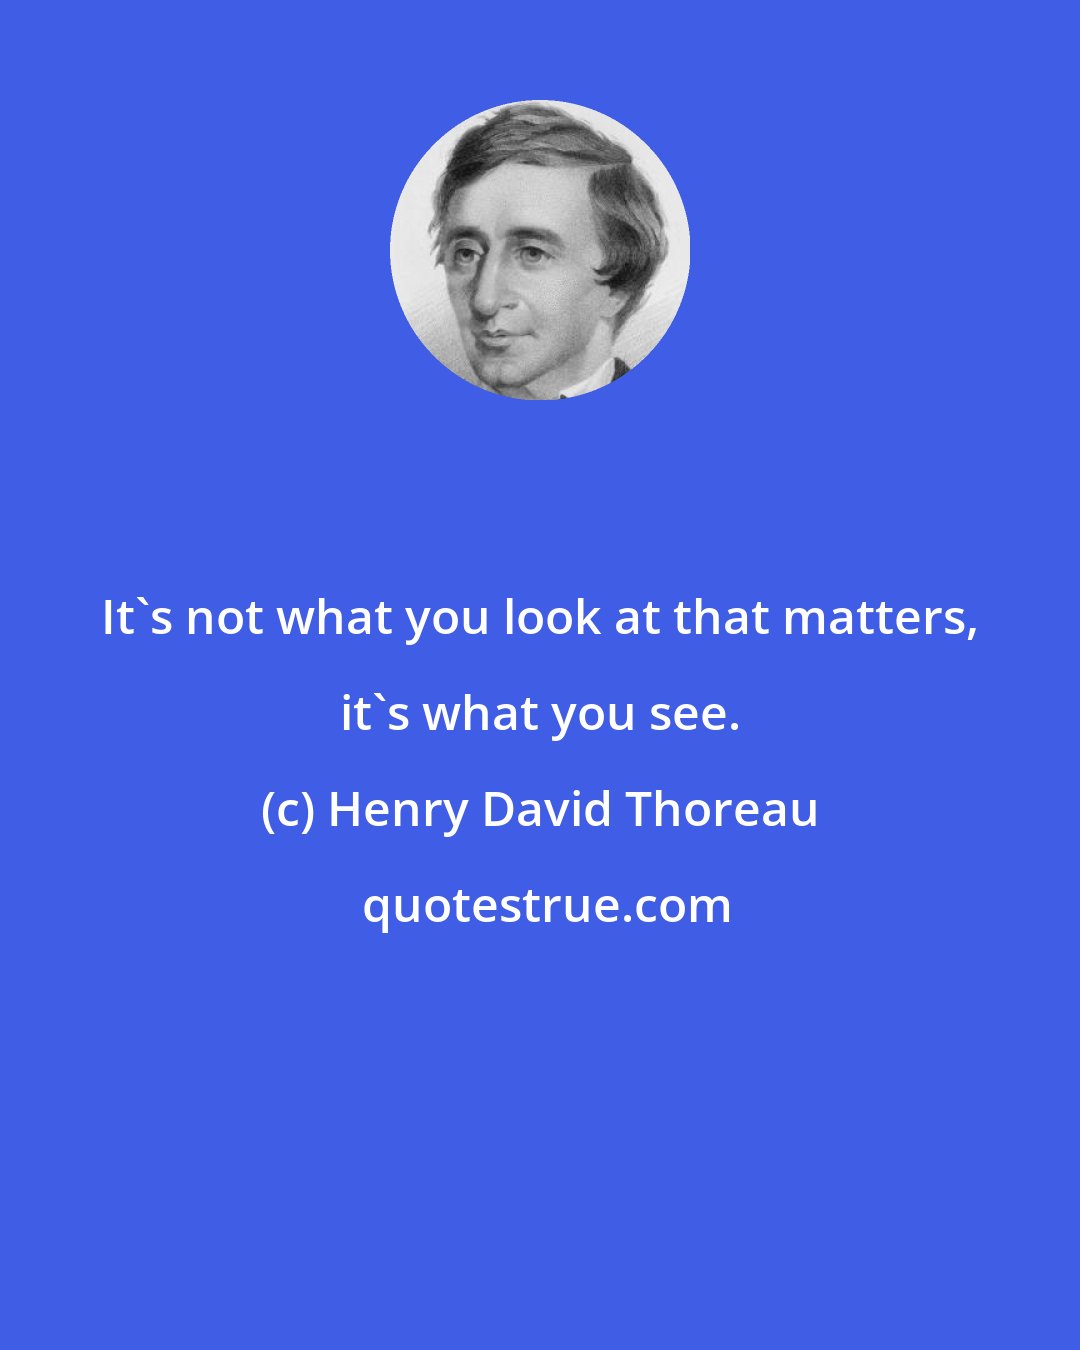 Henry David Thoreau: It's not what you look at that matters, it's what you see.